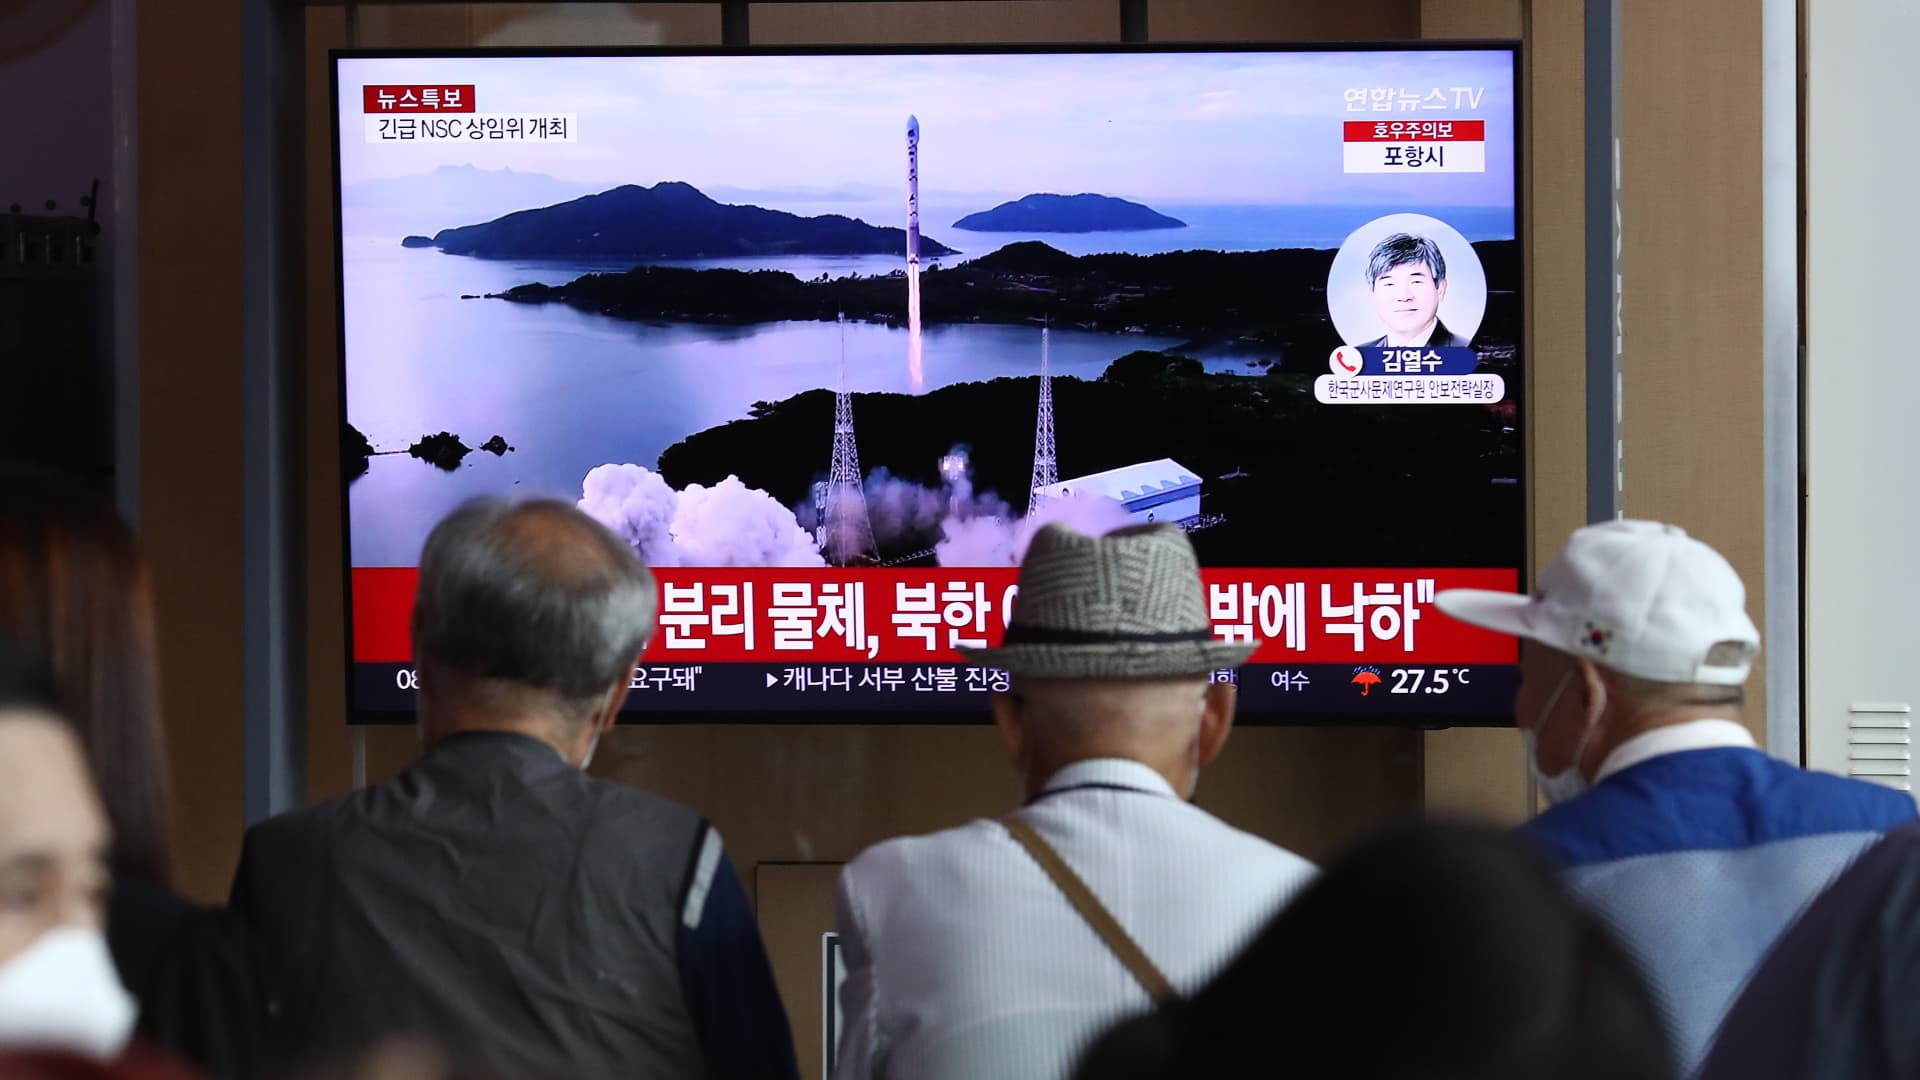 North Korea stages ‘tactical nuclear attack’ drill